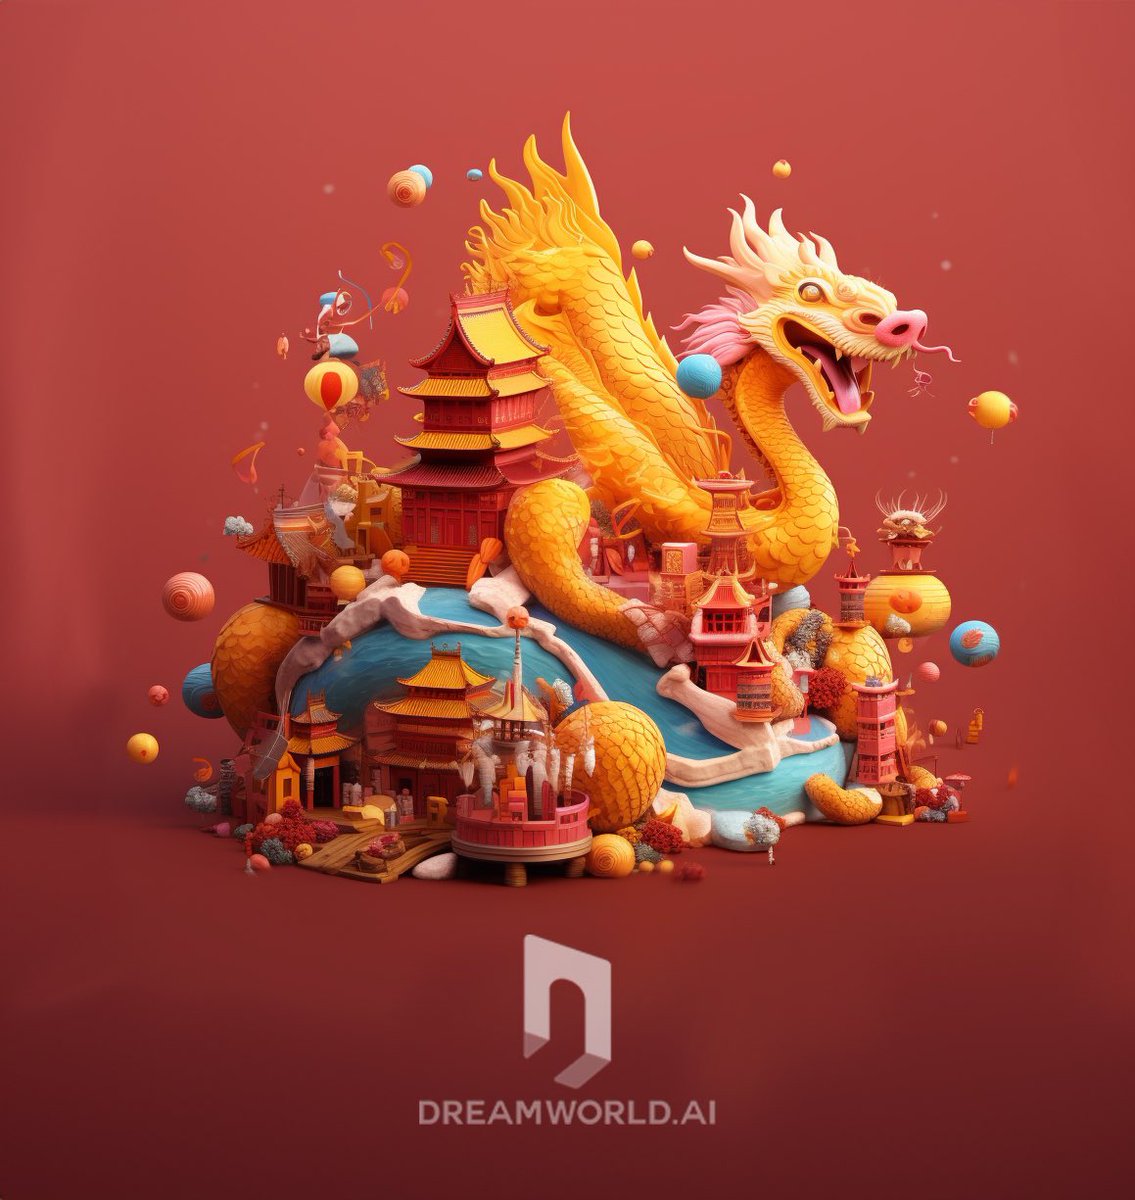 🎊 Wishing everyone a Lunar New Year filled with prosperity and new opportunities! 🧧

🐉 May the Year of the Dragon bring you good fortune, good luck, and a lot of joy. 

⬇️ Follow us:
x.com/dreamworld_ai

#DreamWorldAI #AI #CV #CNY #GenAI #digitalhumans